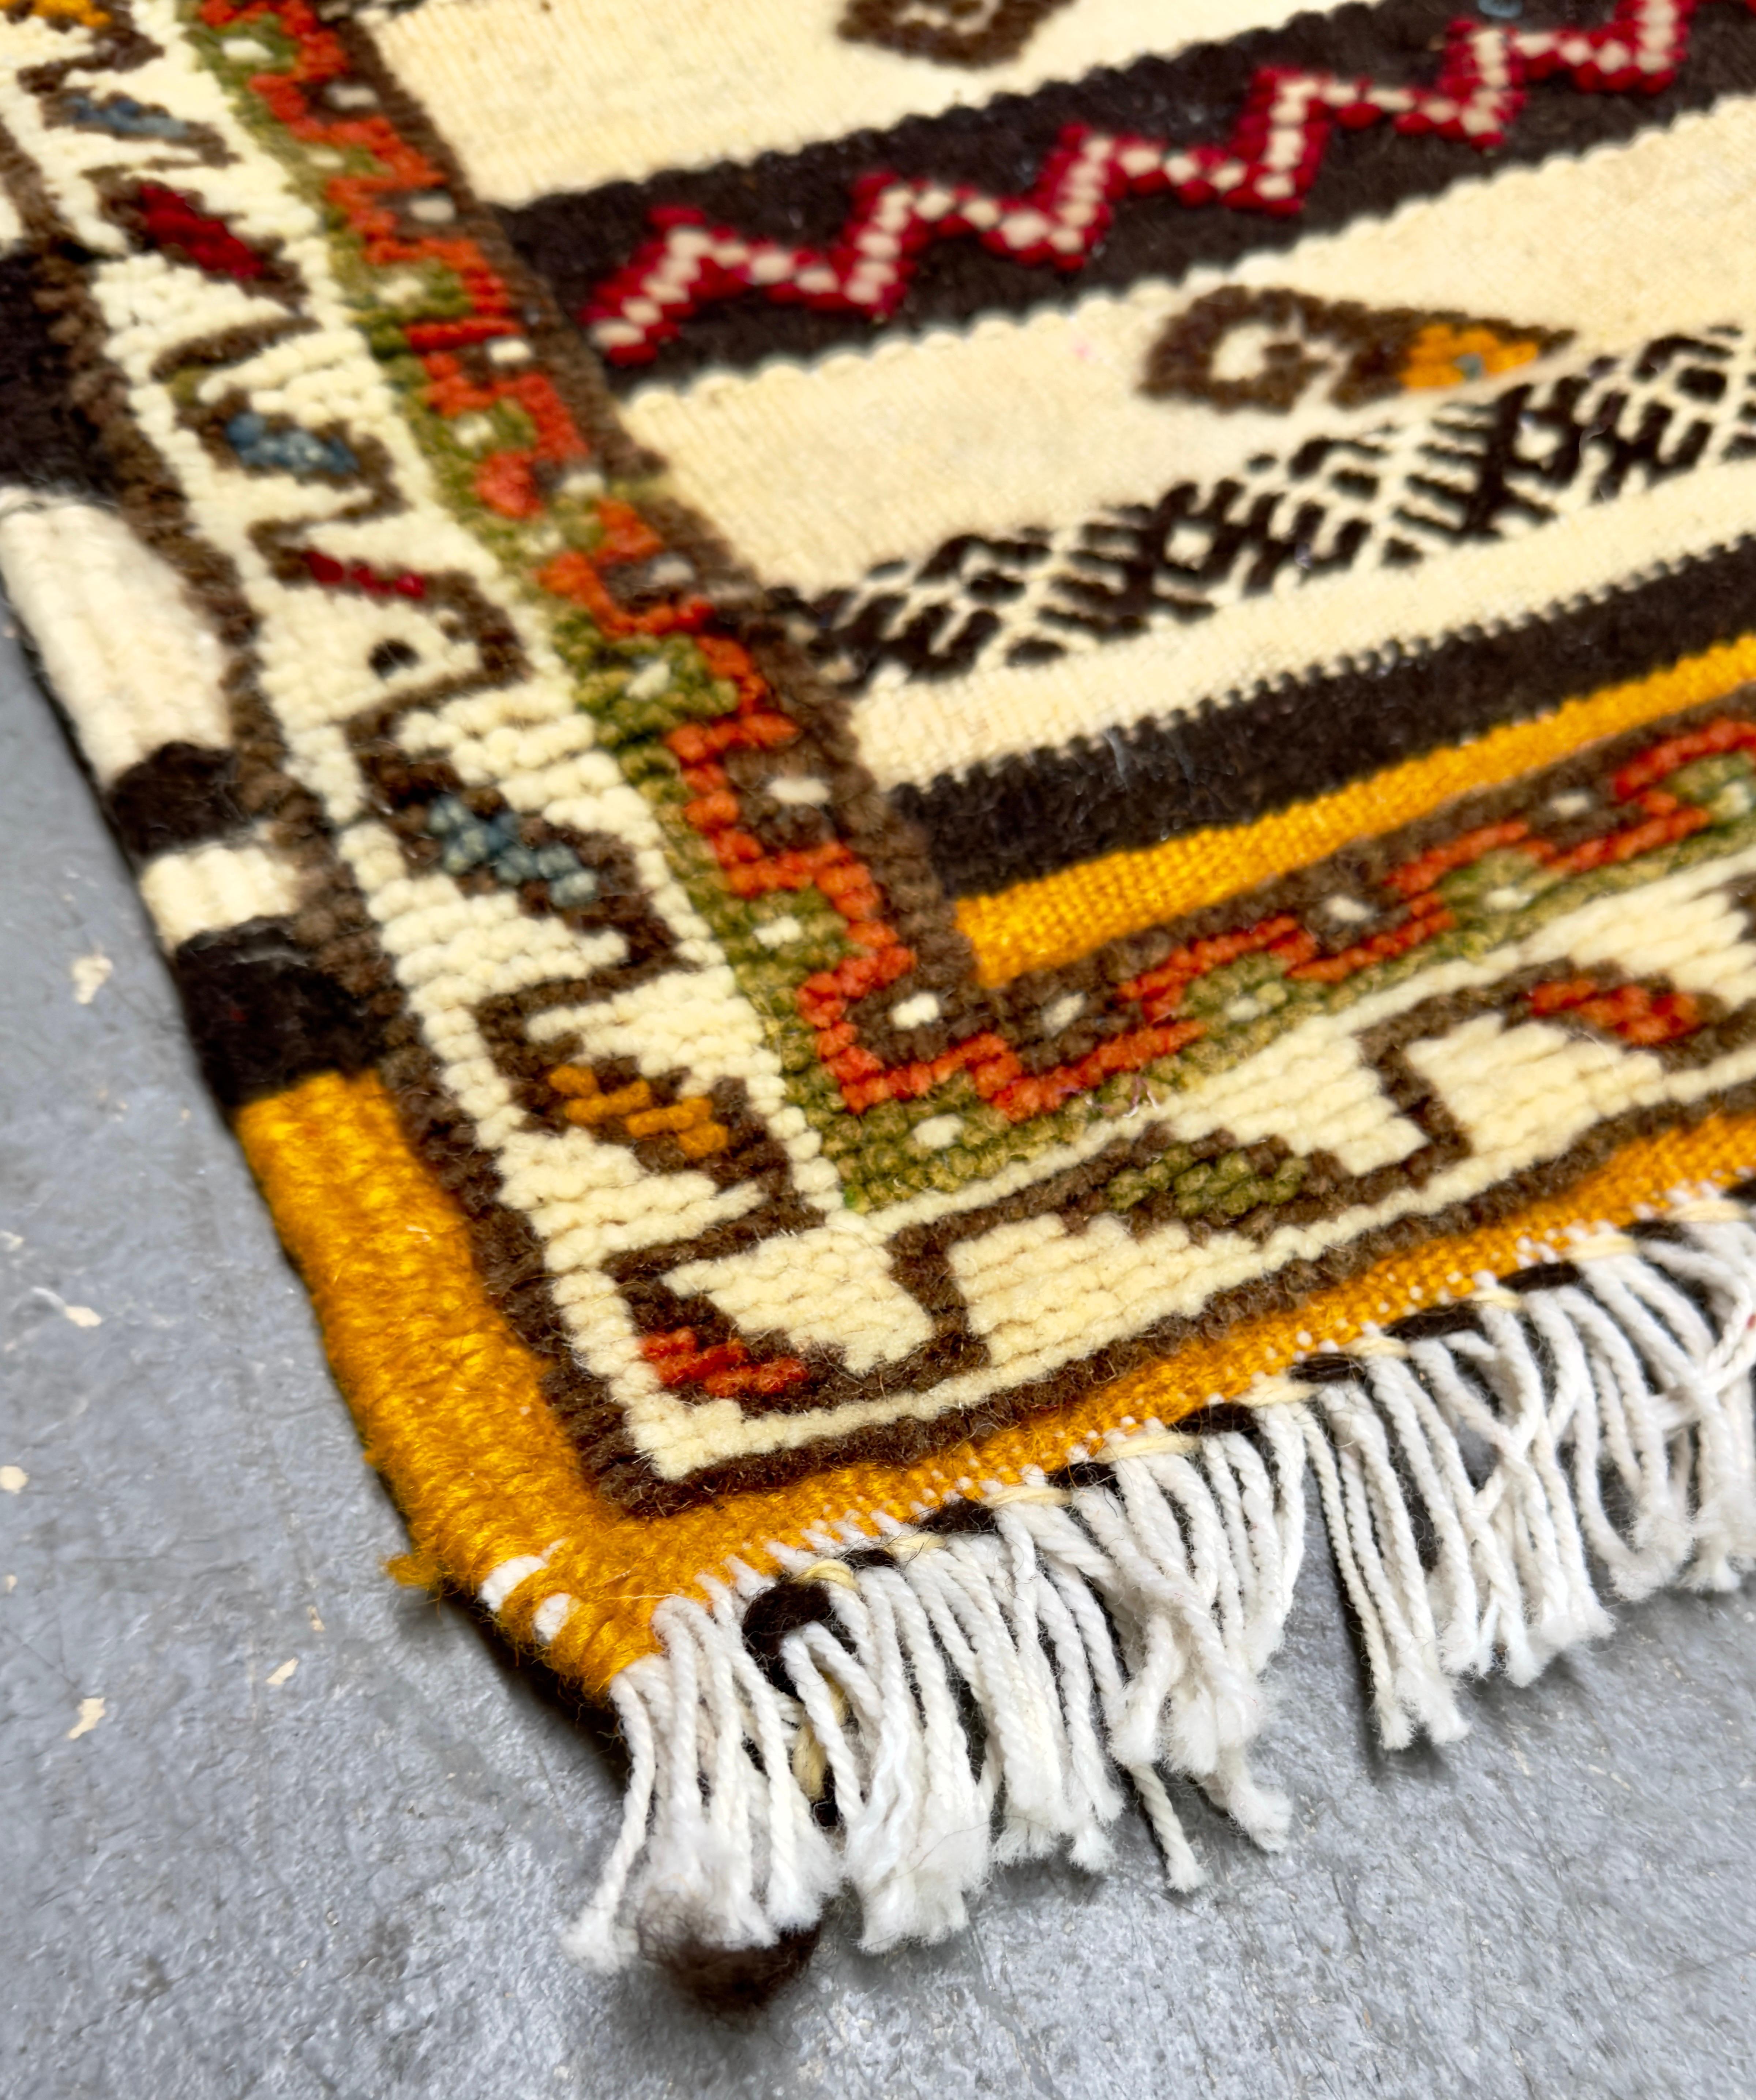 Hand-Woven Boho Chic Moroccan Handwoven Geometrical Wool Rug or Carpet  For Sale